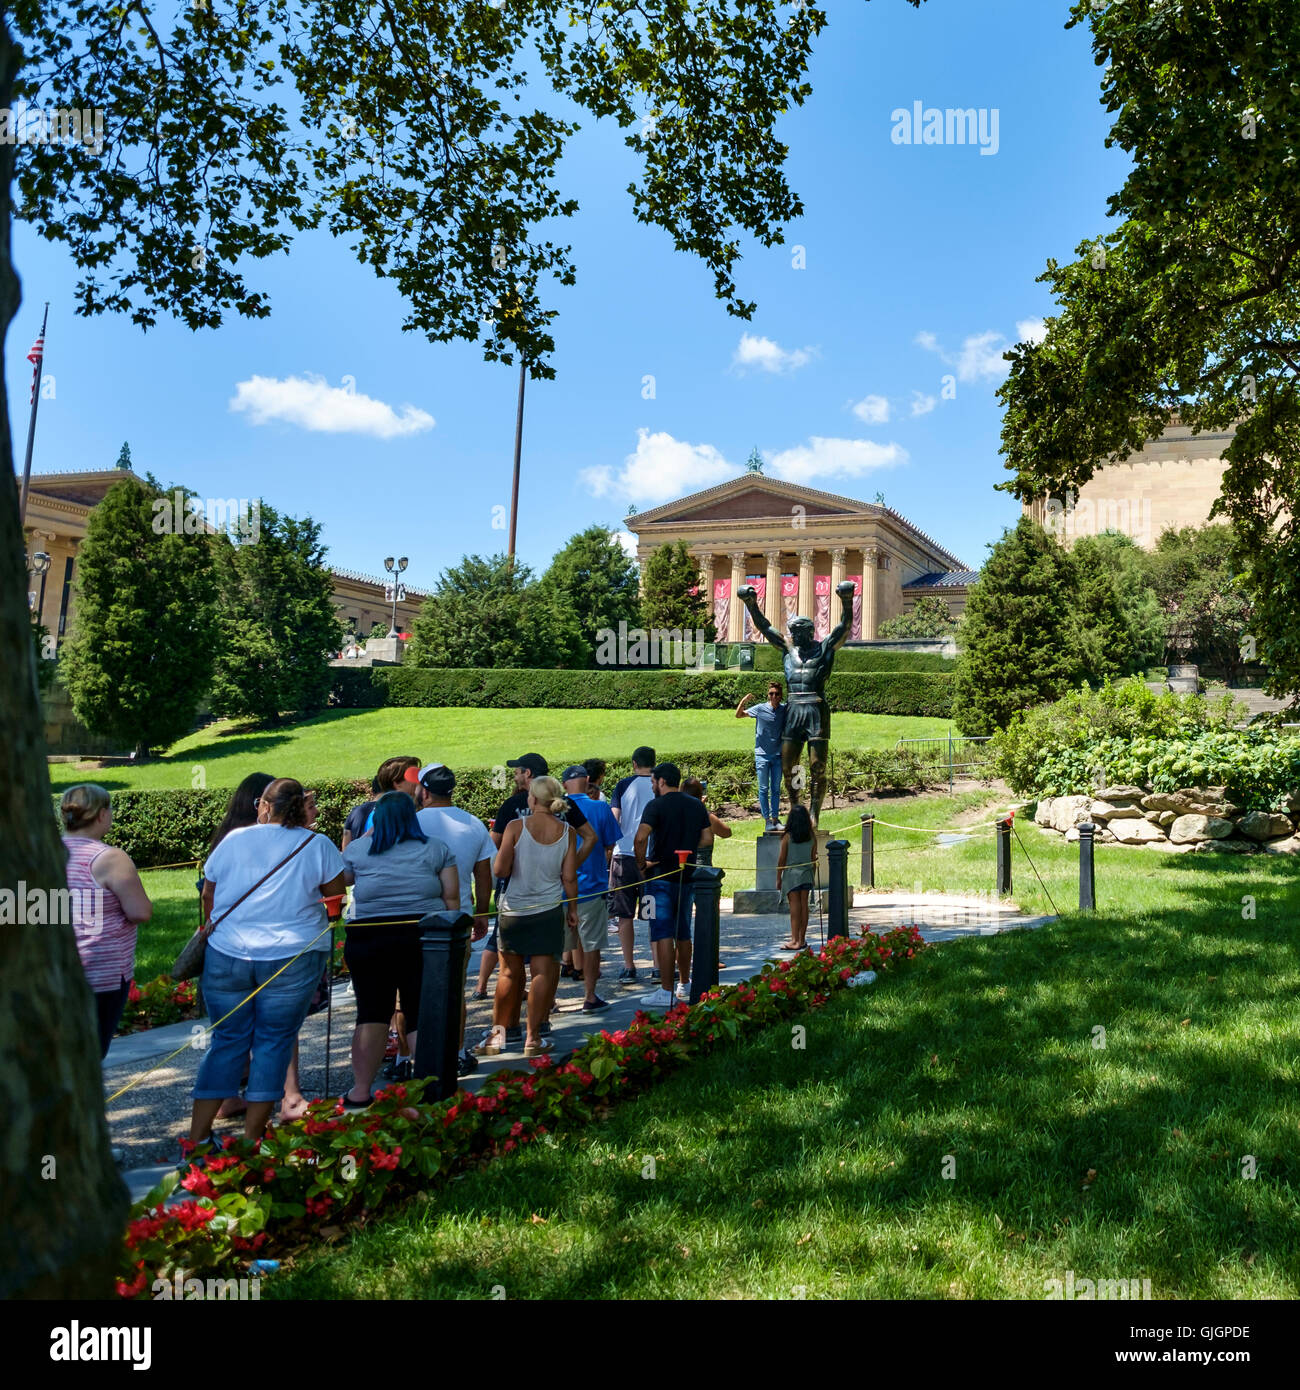 People queue to have their photo taken with the bronze statue of Sylvester Stallone as Rocky Balboa outside the Philadelphia Museum of Art. Stock Photo